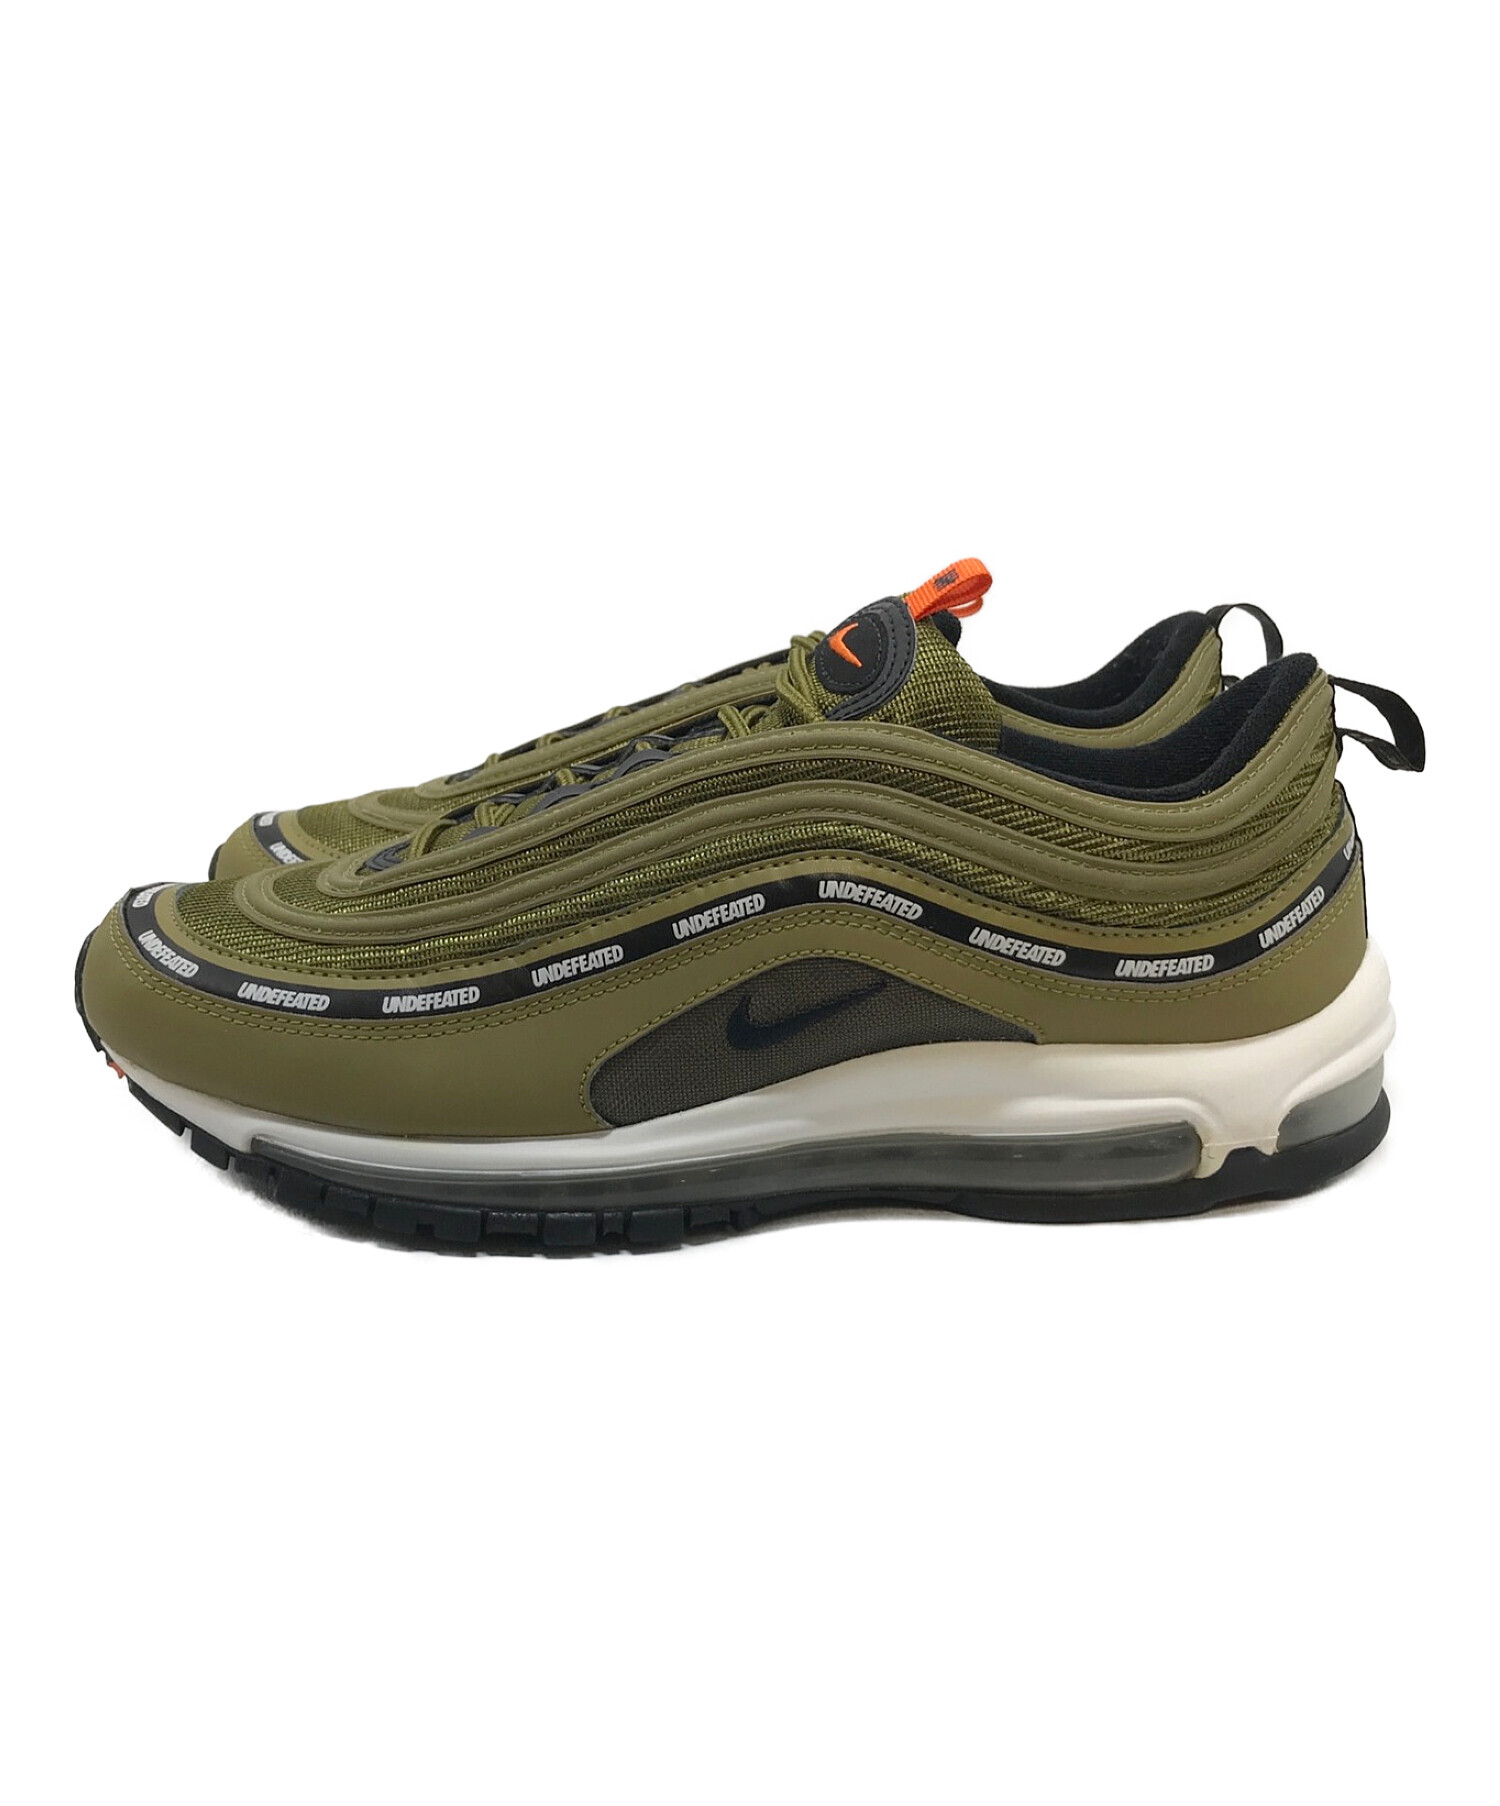 NIKE UNDEFEATED Air Max97スニーカーDC4830 300